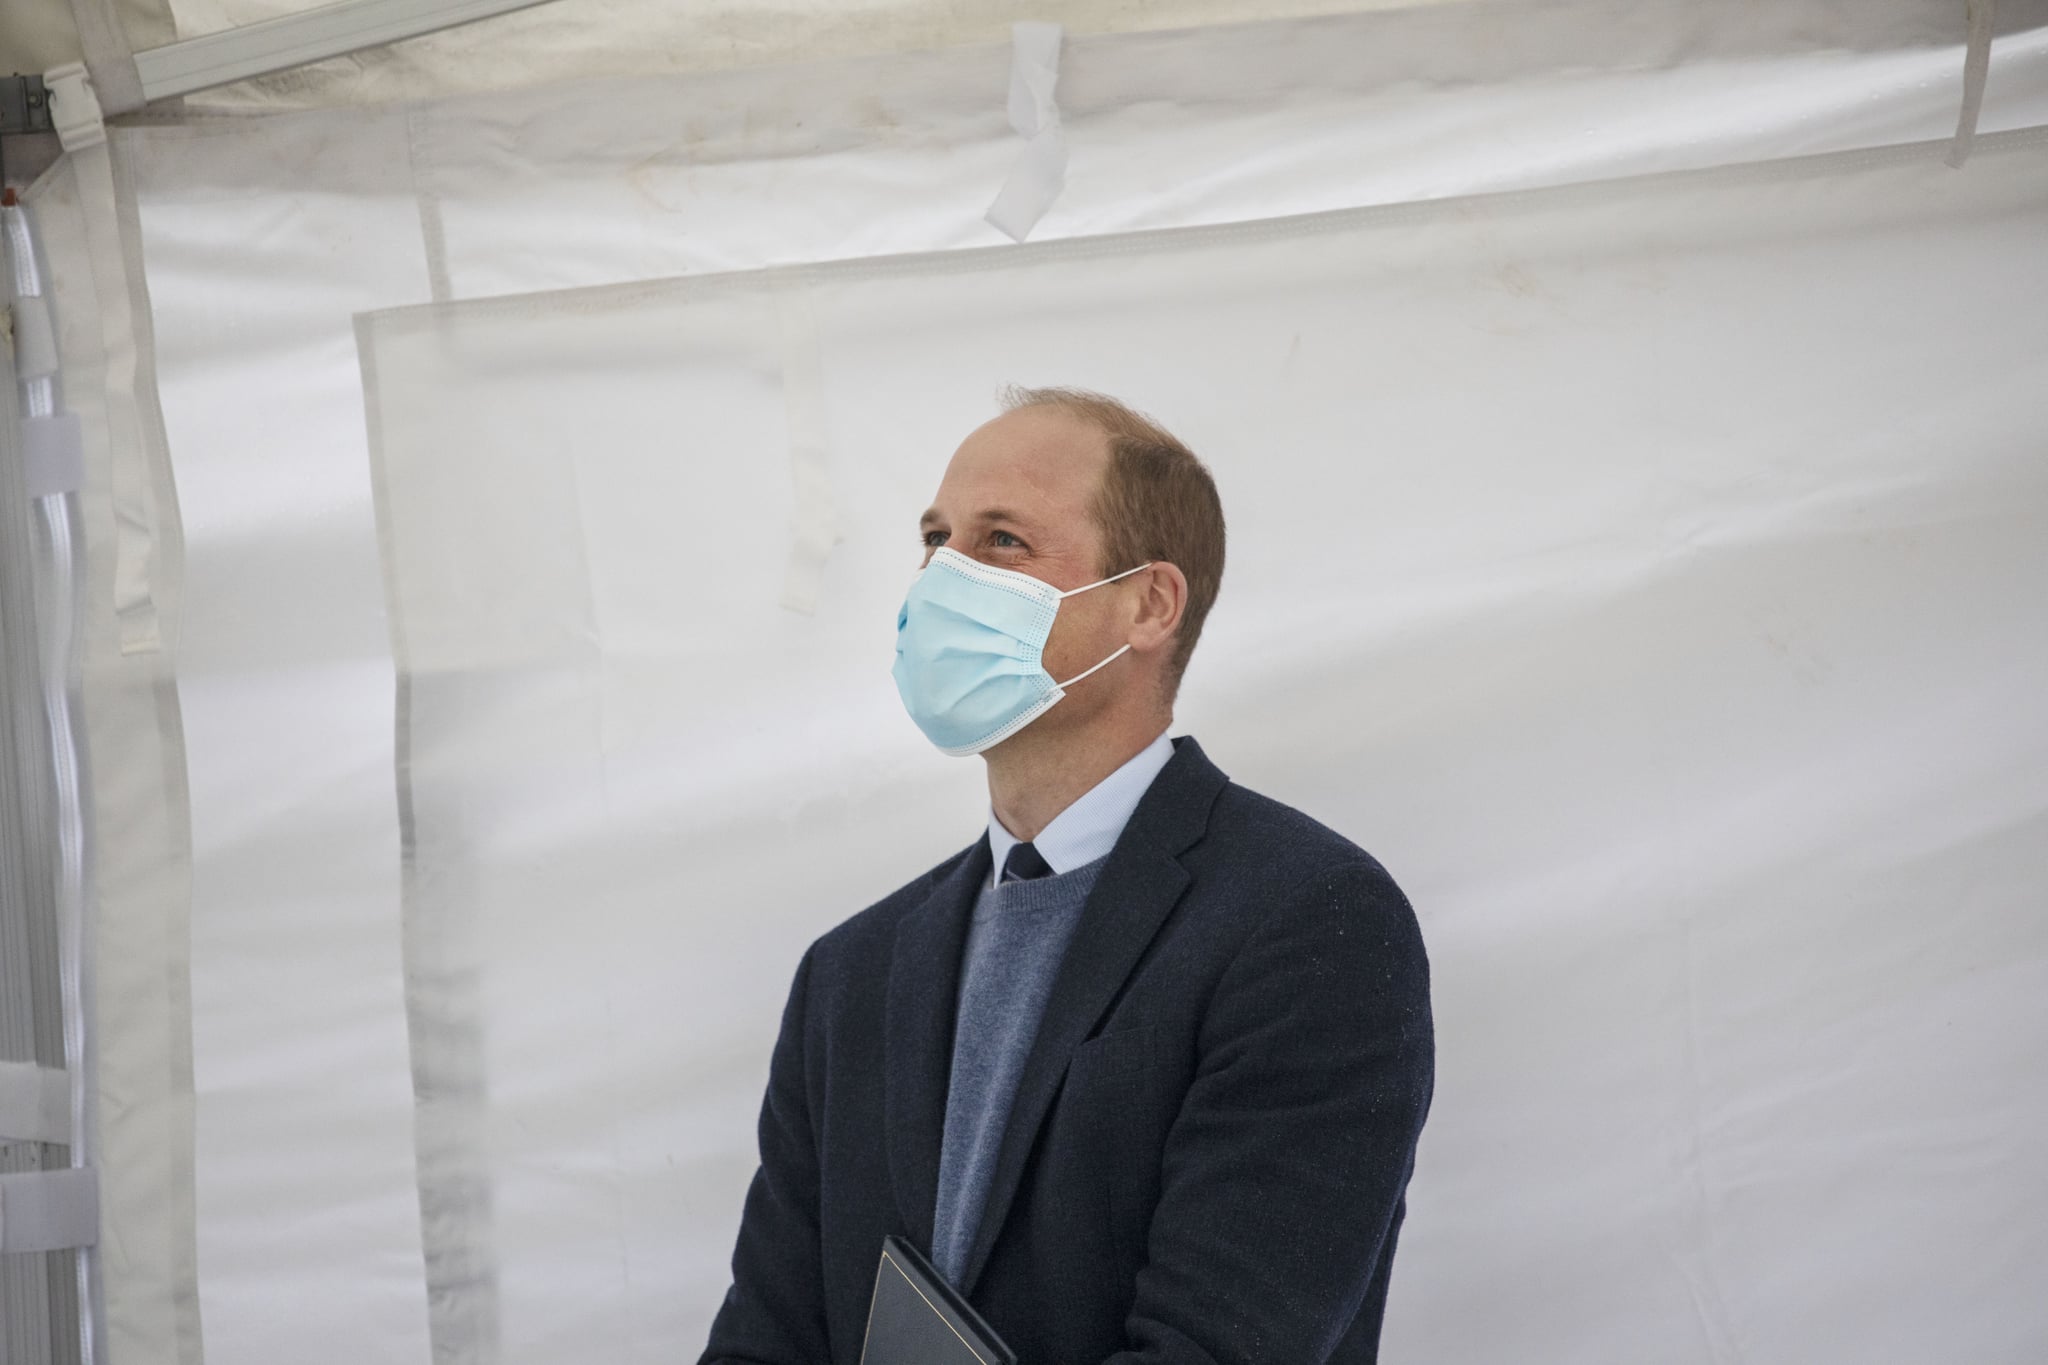 SUTTON, GREATER LONDON - OCTOBER 21:  Prince William, Duke of Cambridge speaks to staff and patients to mark the construction of the groundbreaking Oak cancer centre at Royal Marsden Hospital on October 21, 2020 in Sutton, Greater London. (Photo by Jack Hill -  WPA Pool/Getty Images)